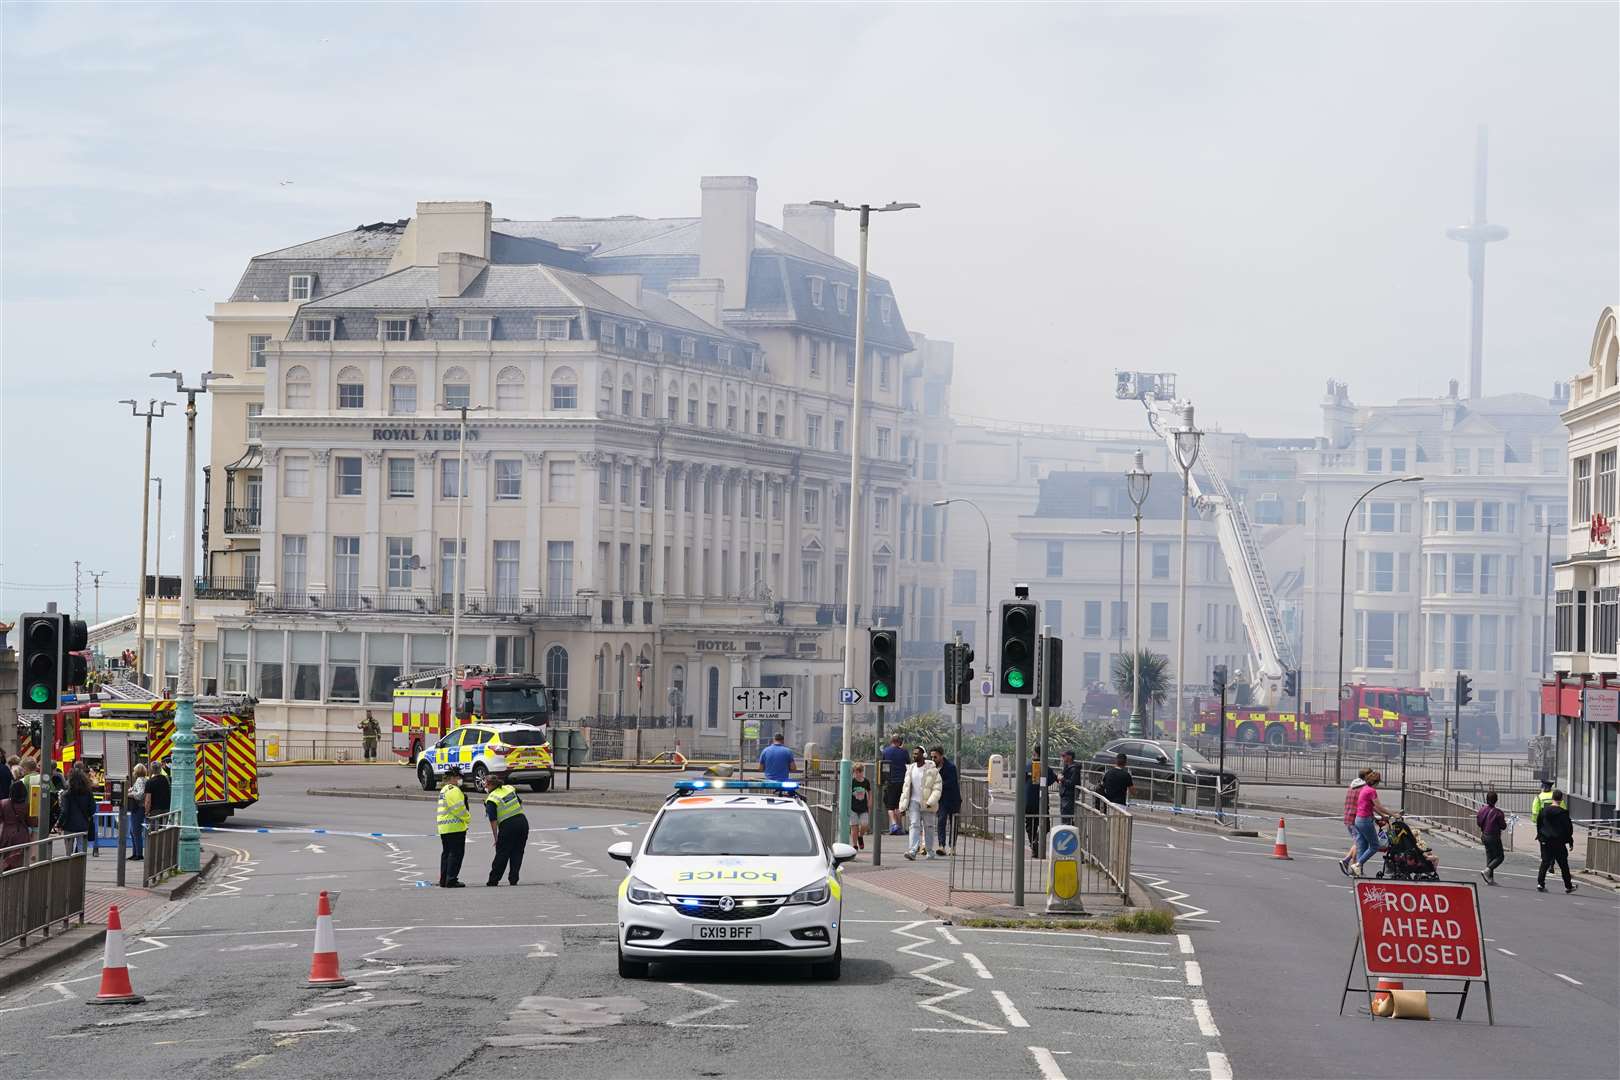 Police and firefighters at the scene in Brighton after a fire at the Royal Albion Hotel (Gareth Fuller/PA)